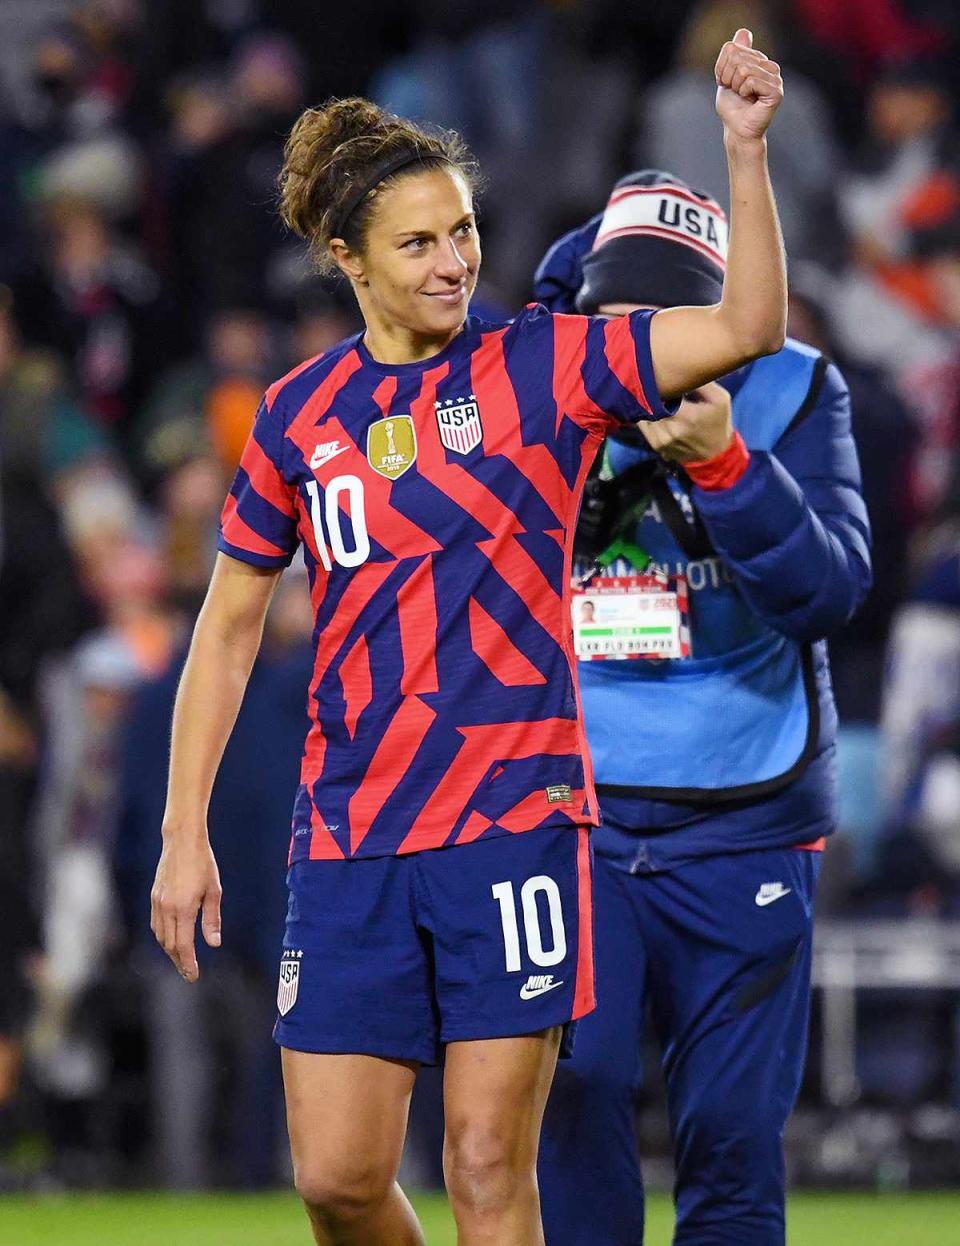 SAINT PAUL, MN - OCTOBER 26: United States forward Carli Lloyd (10) acknowledges the fans as she takes a lap after her final game, a friendly soccer match between Korea Republic and the United States on Oct 26, 2021 at Allianz Field in Saint Paul, MN.